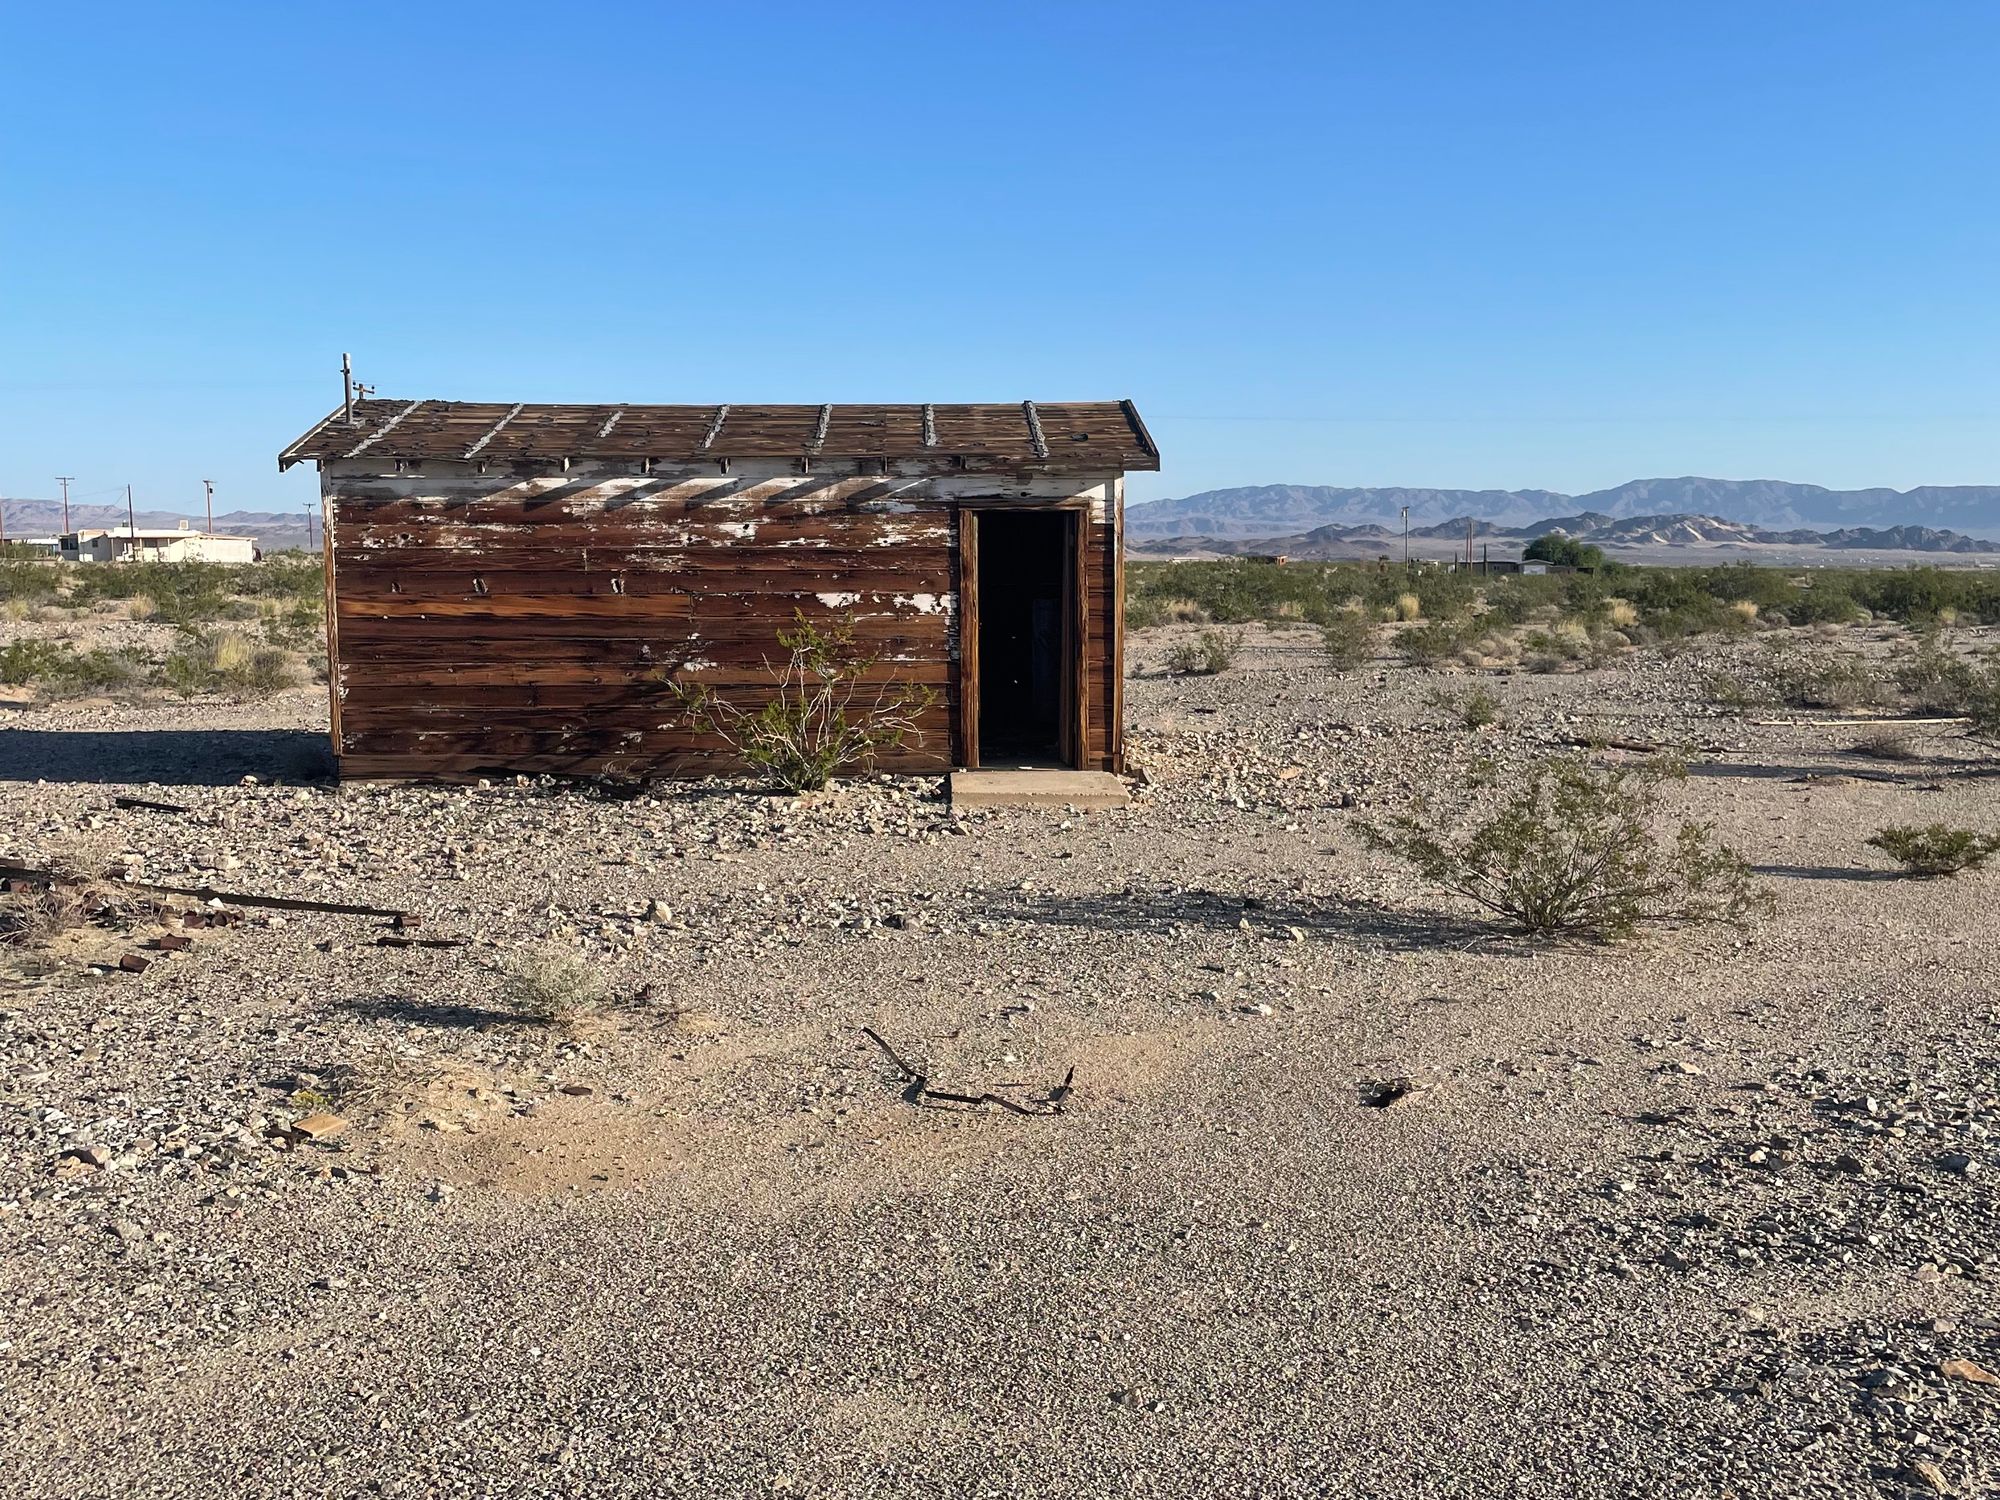 A small shed is situated in the middle of nowhere, California.